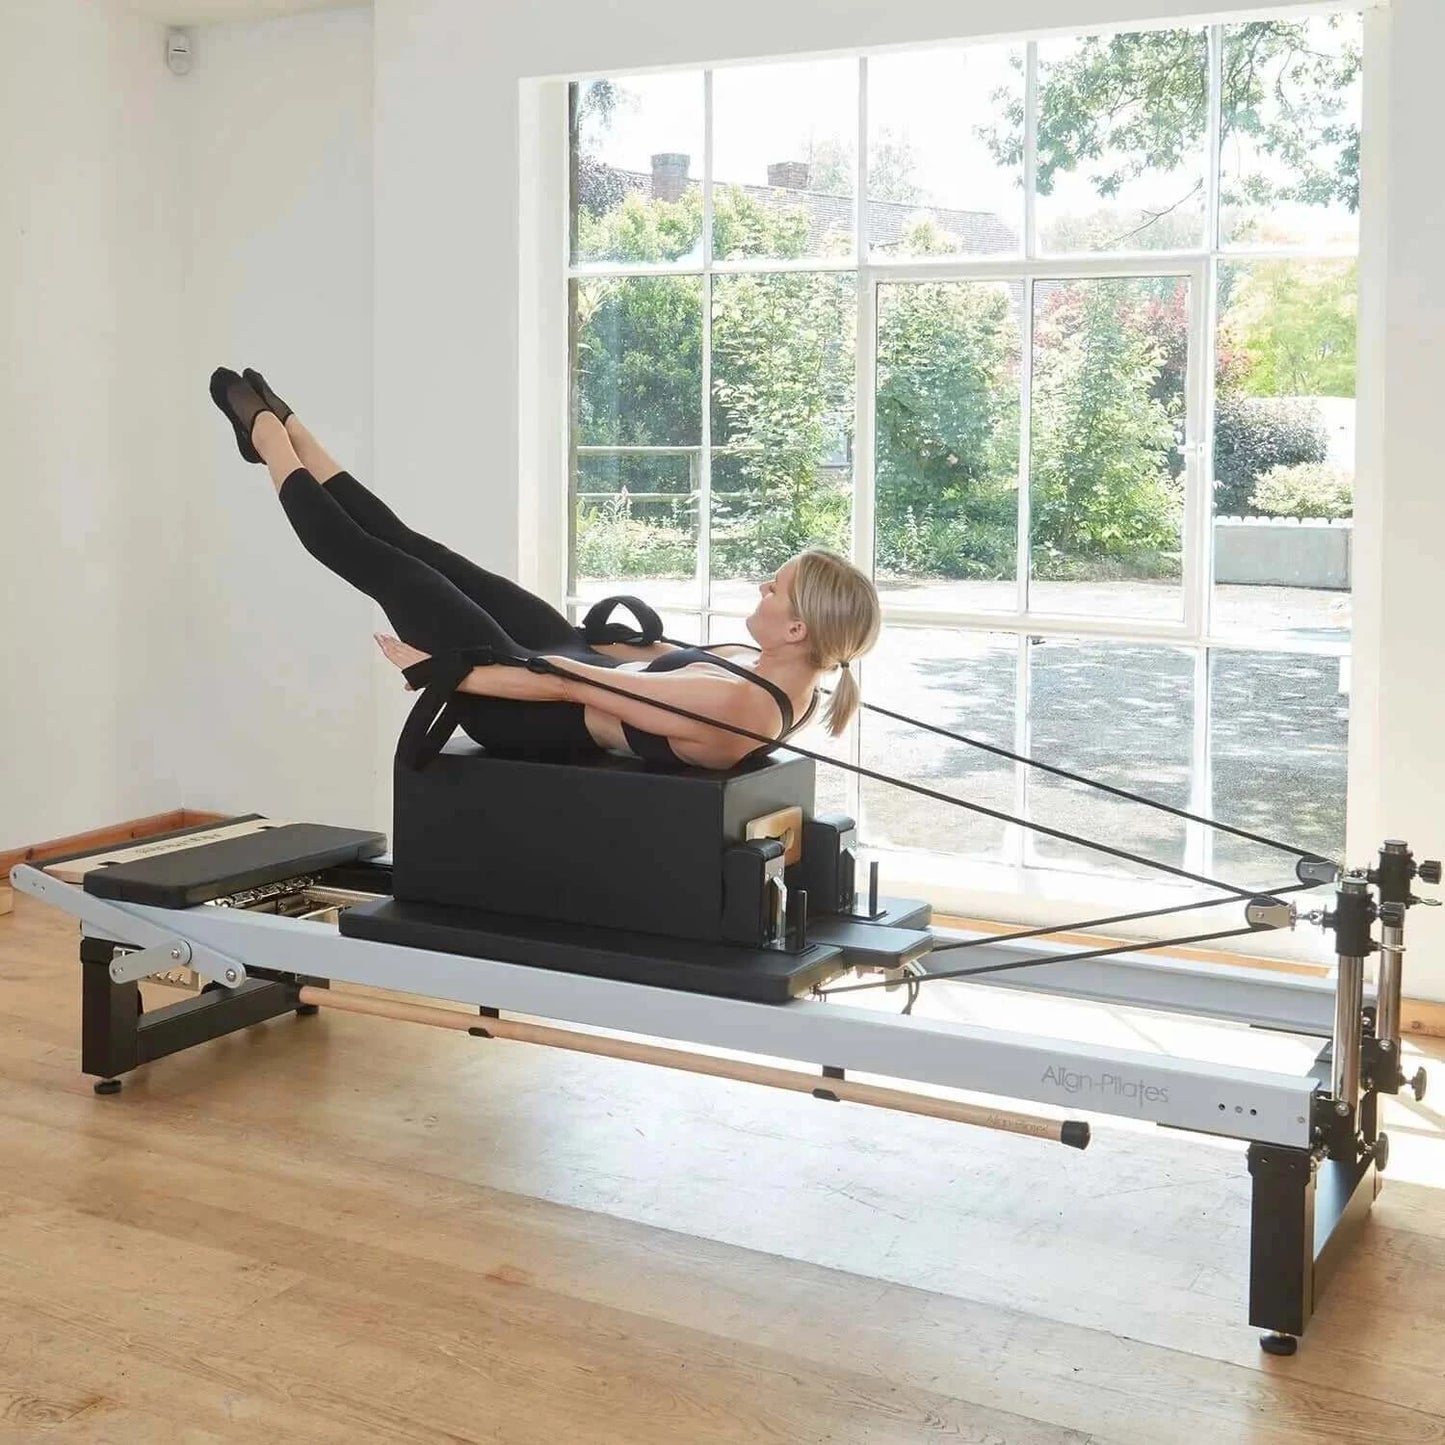  Align Pilates Sitting Box by Align Pilates sold by Pilates Matters® by BSP LLC